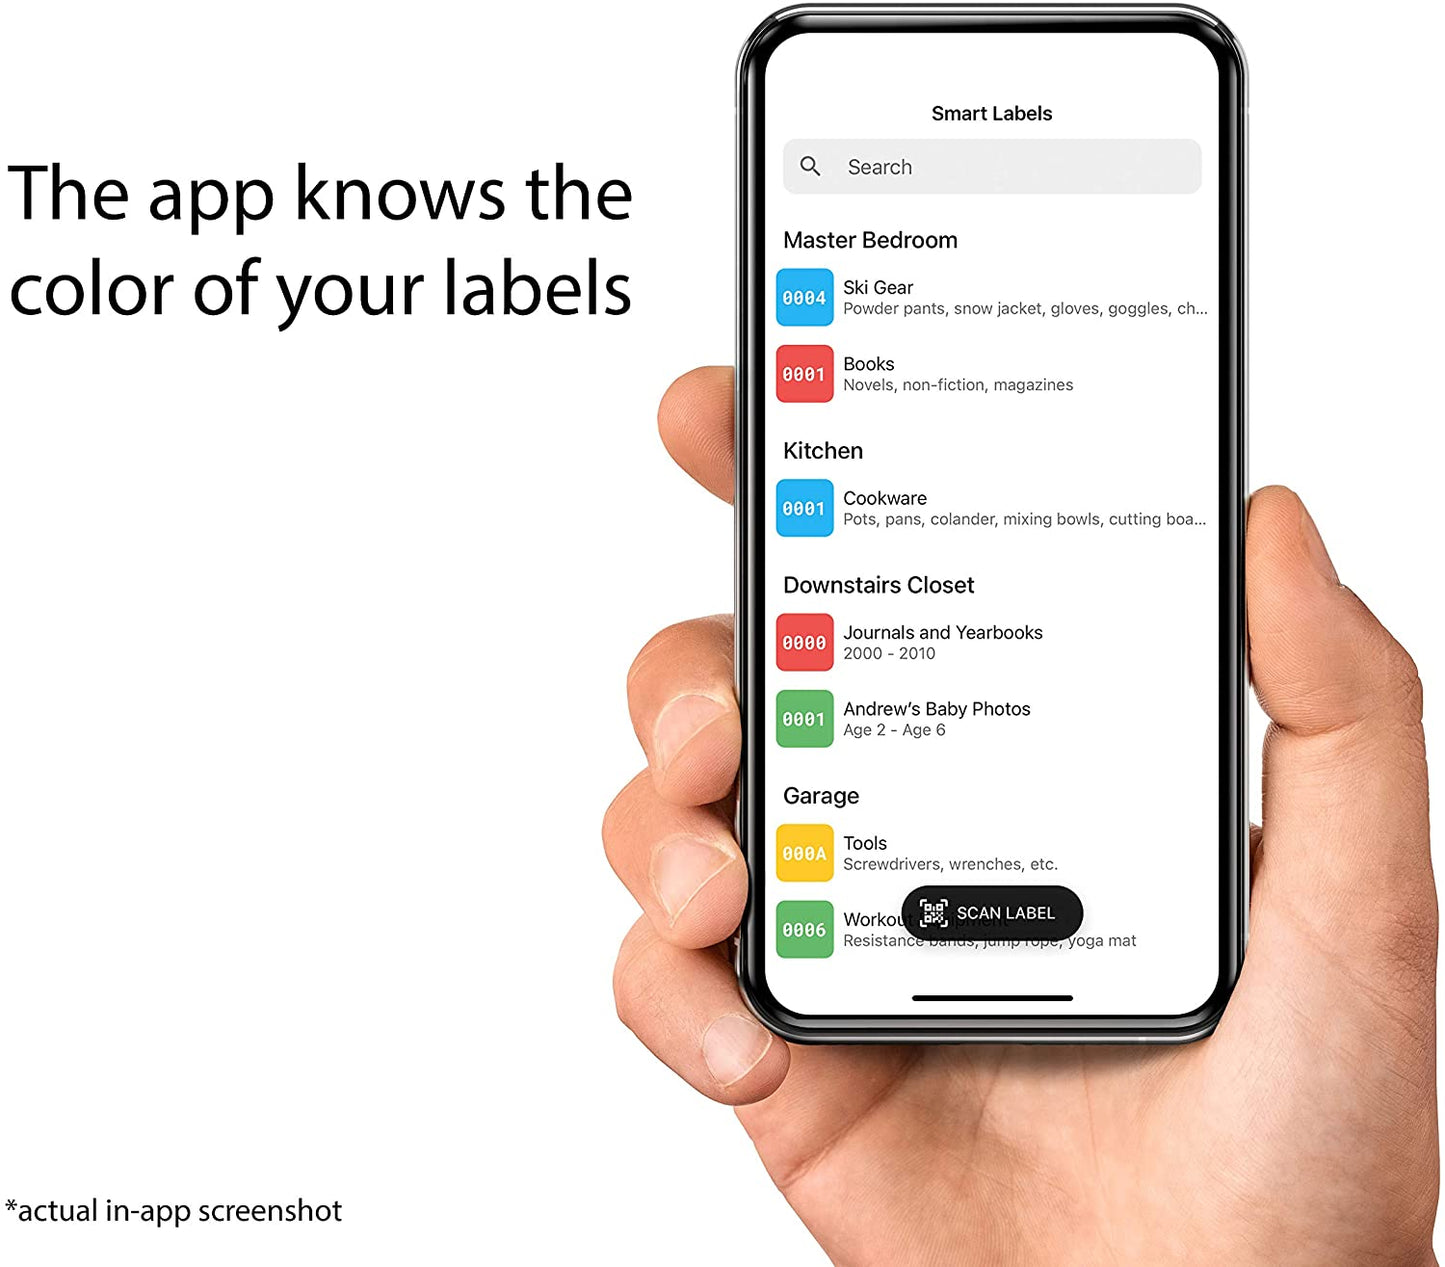 The Smart Labels app picks up the color of the QR code labels you scan to help you stay super organized.